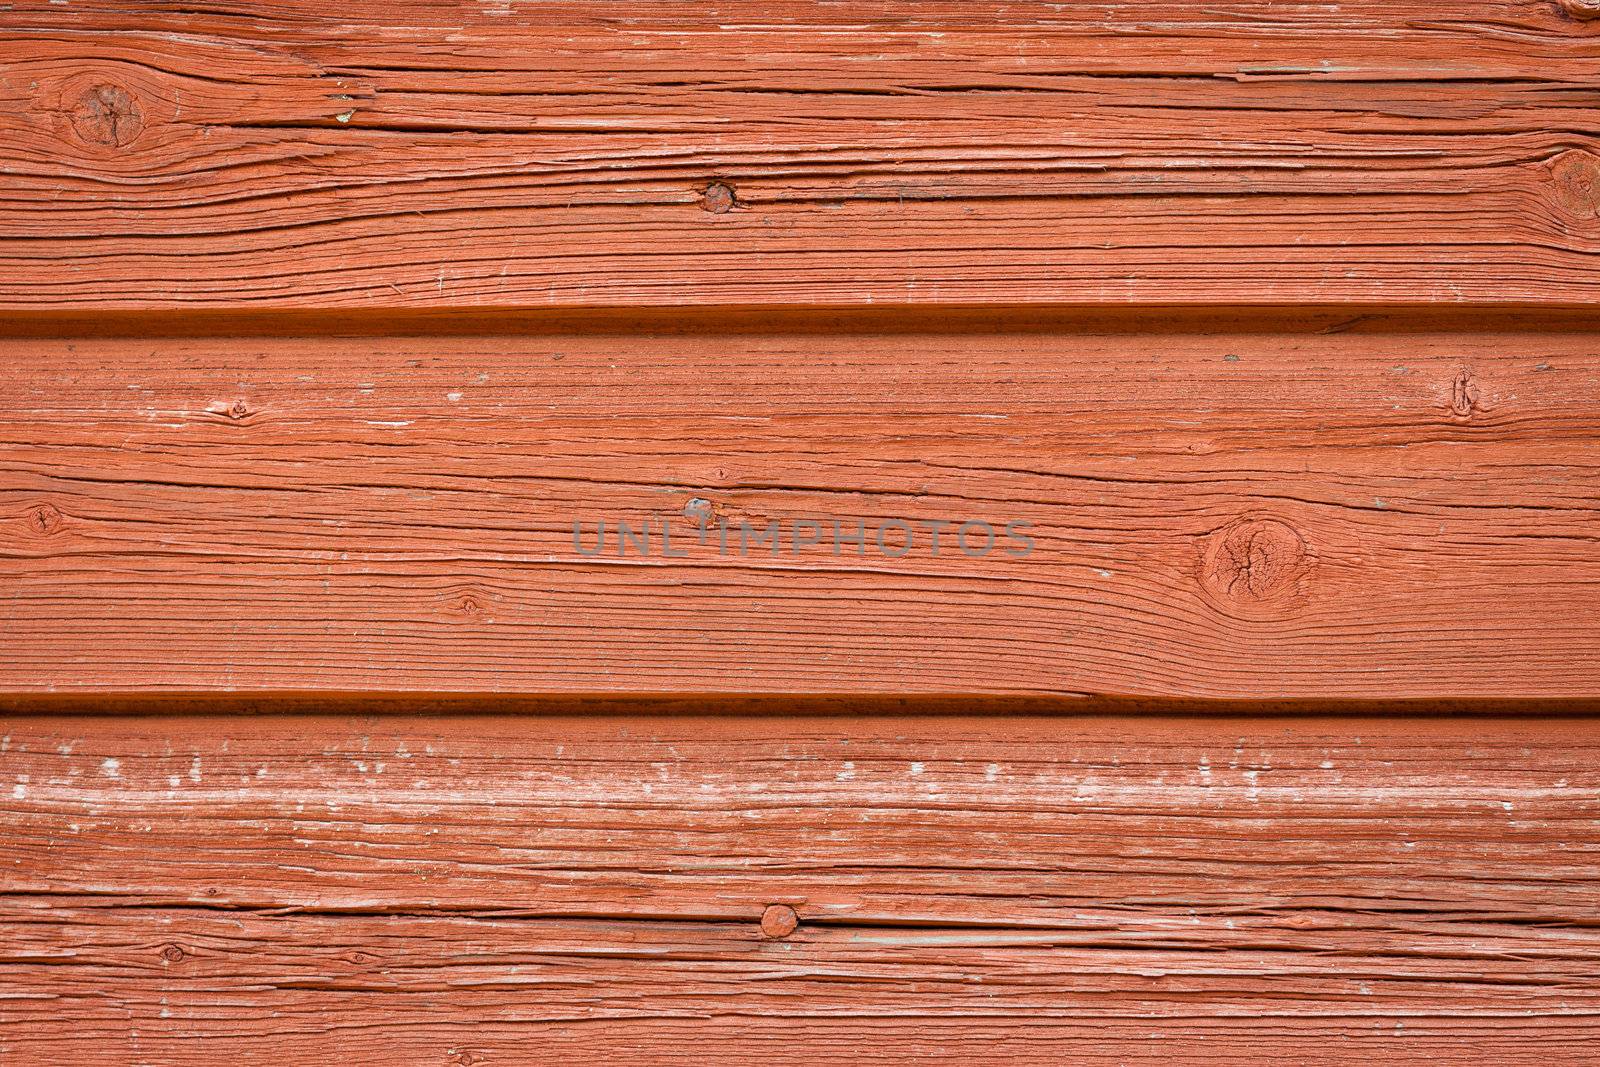 Grungy red wooden background or texture